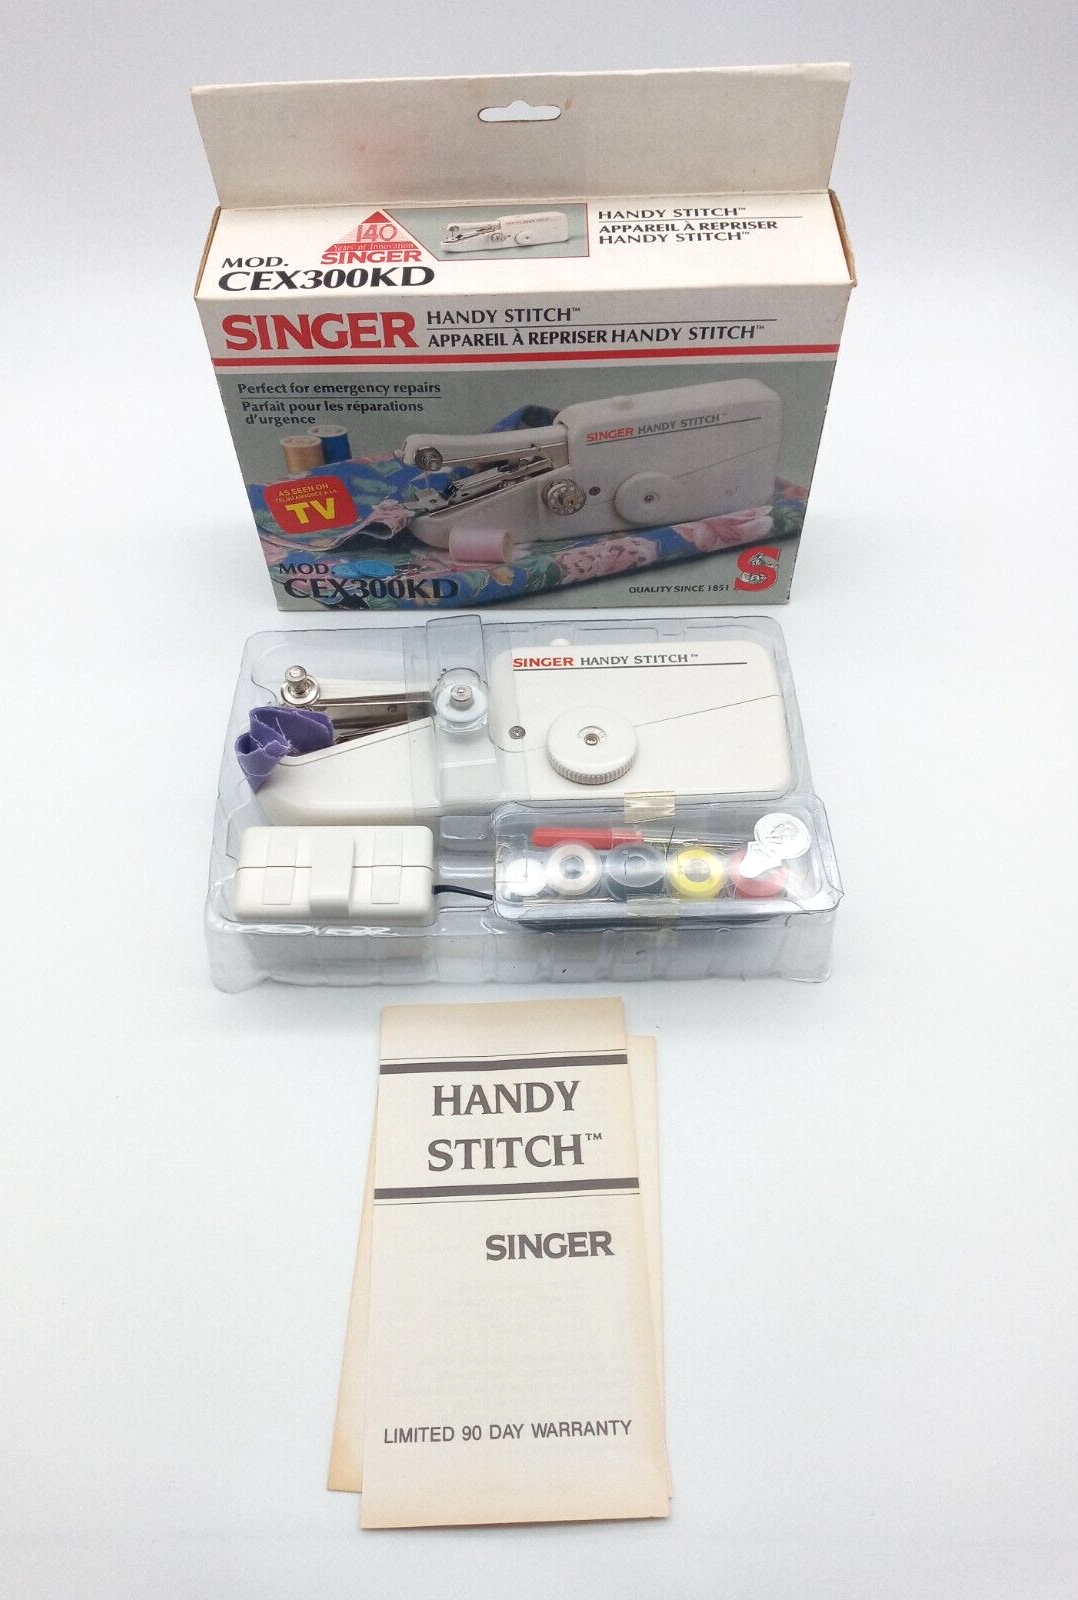 Primary image for Singer Handy Stitch Handheld Sewing Machine CEX300KD - NEW Open Box